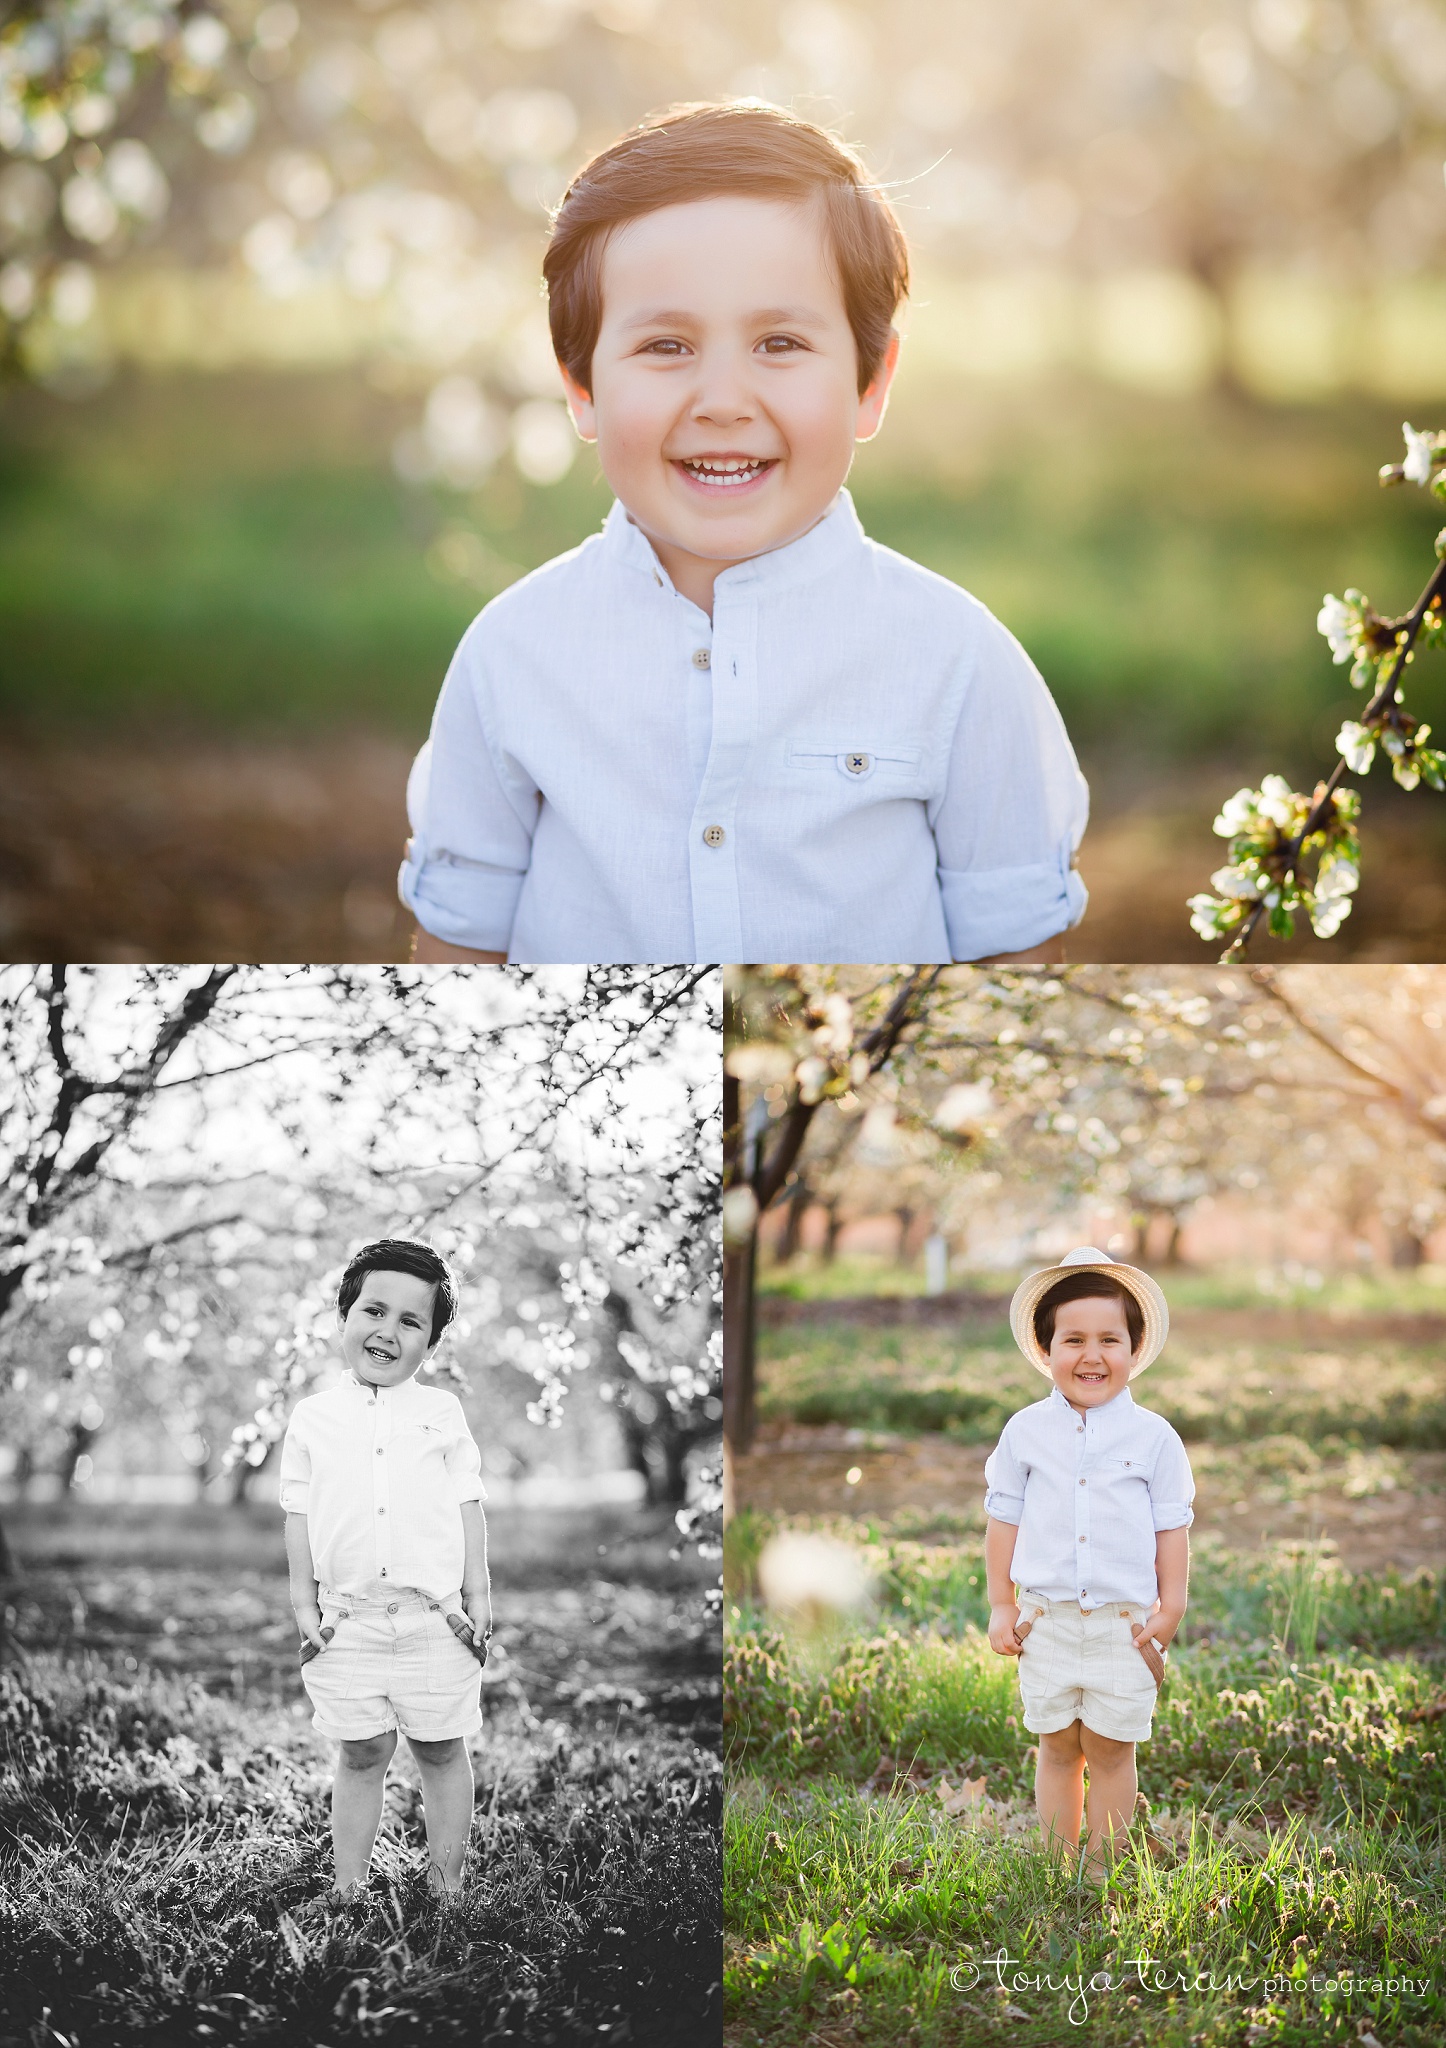 Cherry Blossom Tree Session | Bethesda, MD Newborn, Baby and Family Photographer